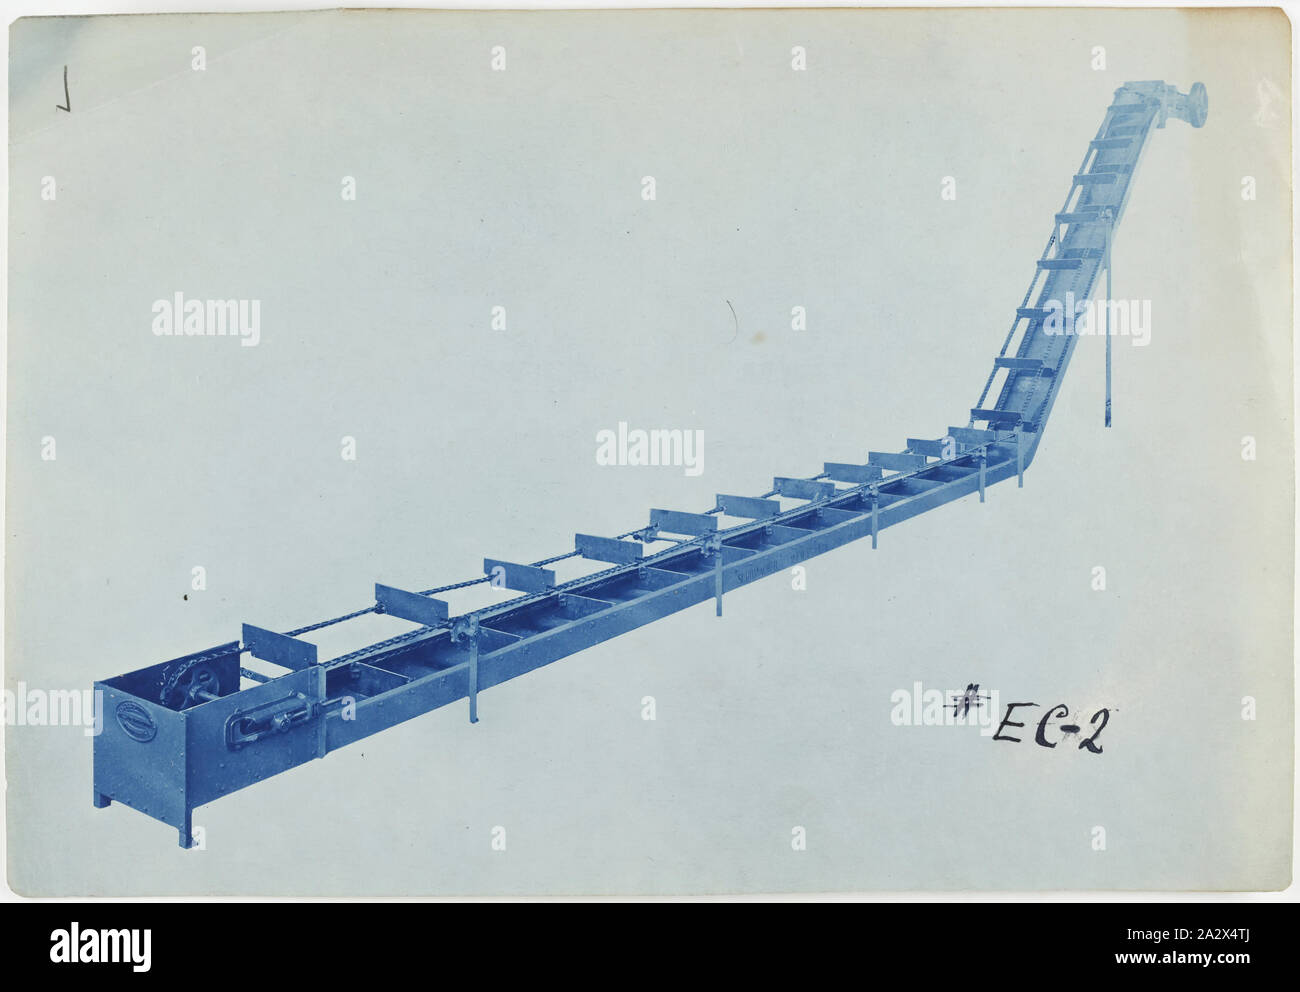 Photograph - Schumacher Mill Furnishing Works, Conveyor, Port Melbourne, Victoria, circa 1930s, Cyanotype promotional image of a conveyor. It is part of a collection of photographs and marked printer's copy used in the preparation of trade literature promoting products manufactured by the Schumacher Mill Furnishing Works Pty Ltd. The items were originally housed in a wooden filing drawer Stock Photo